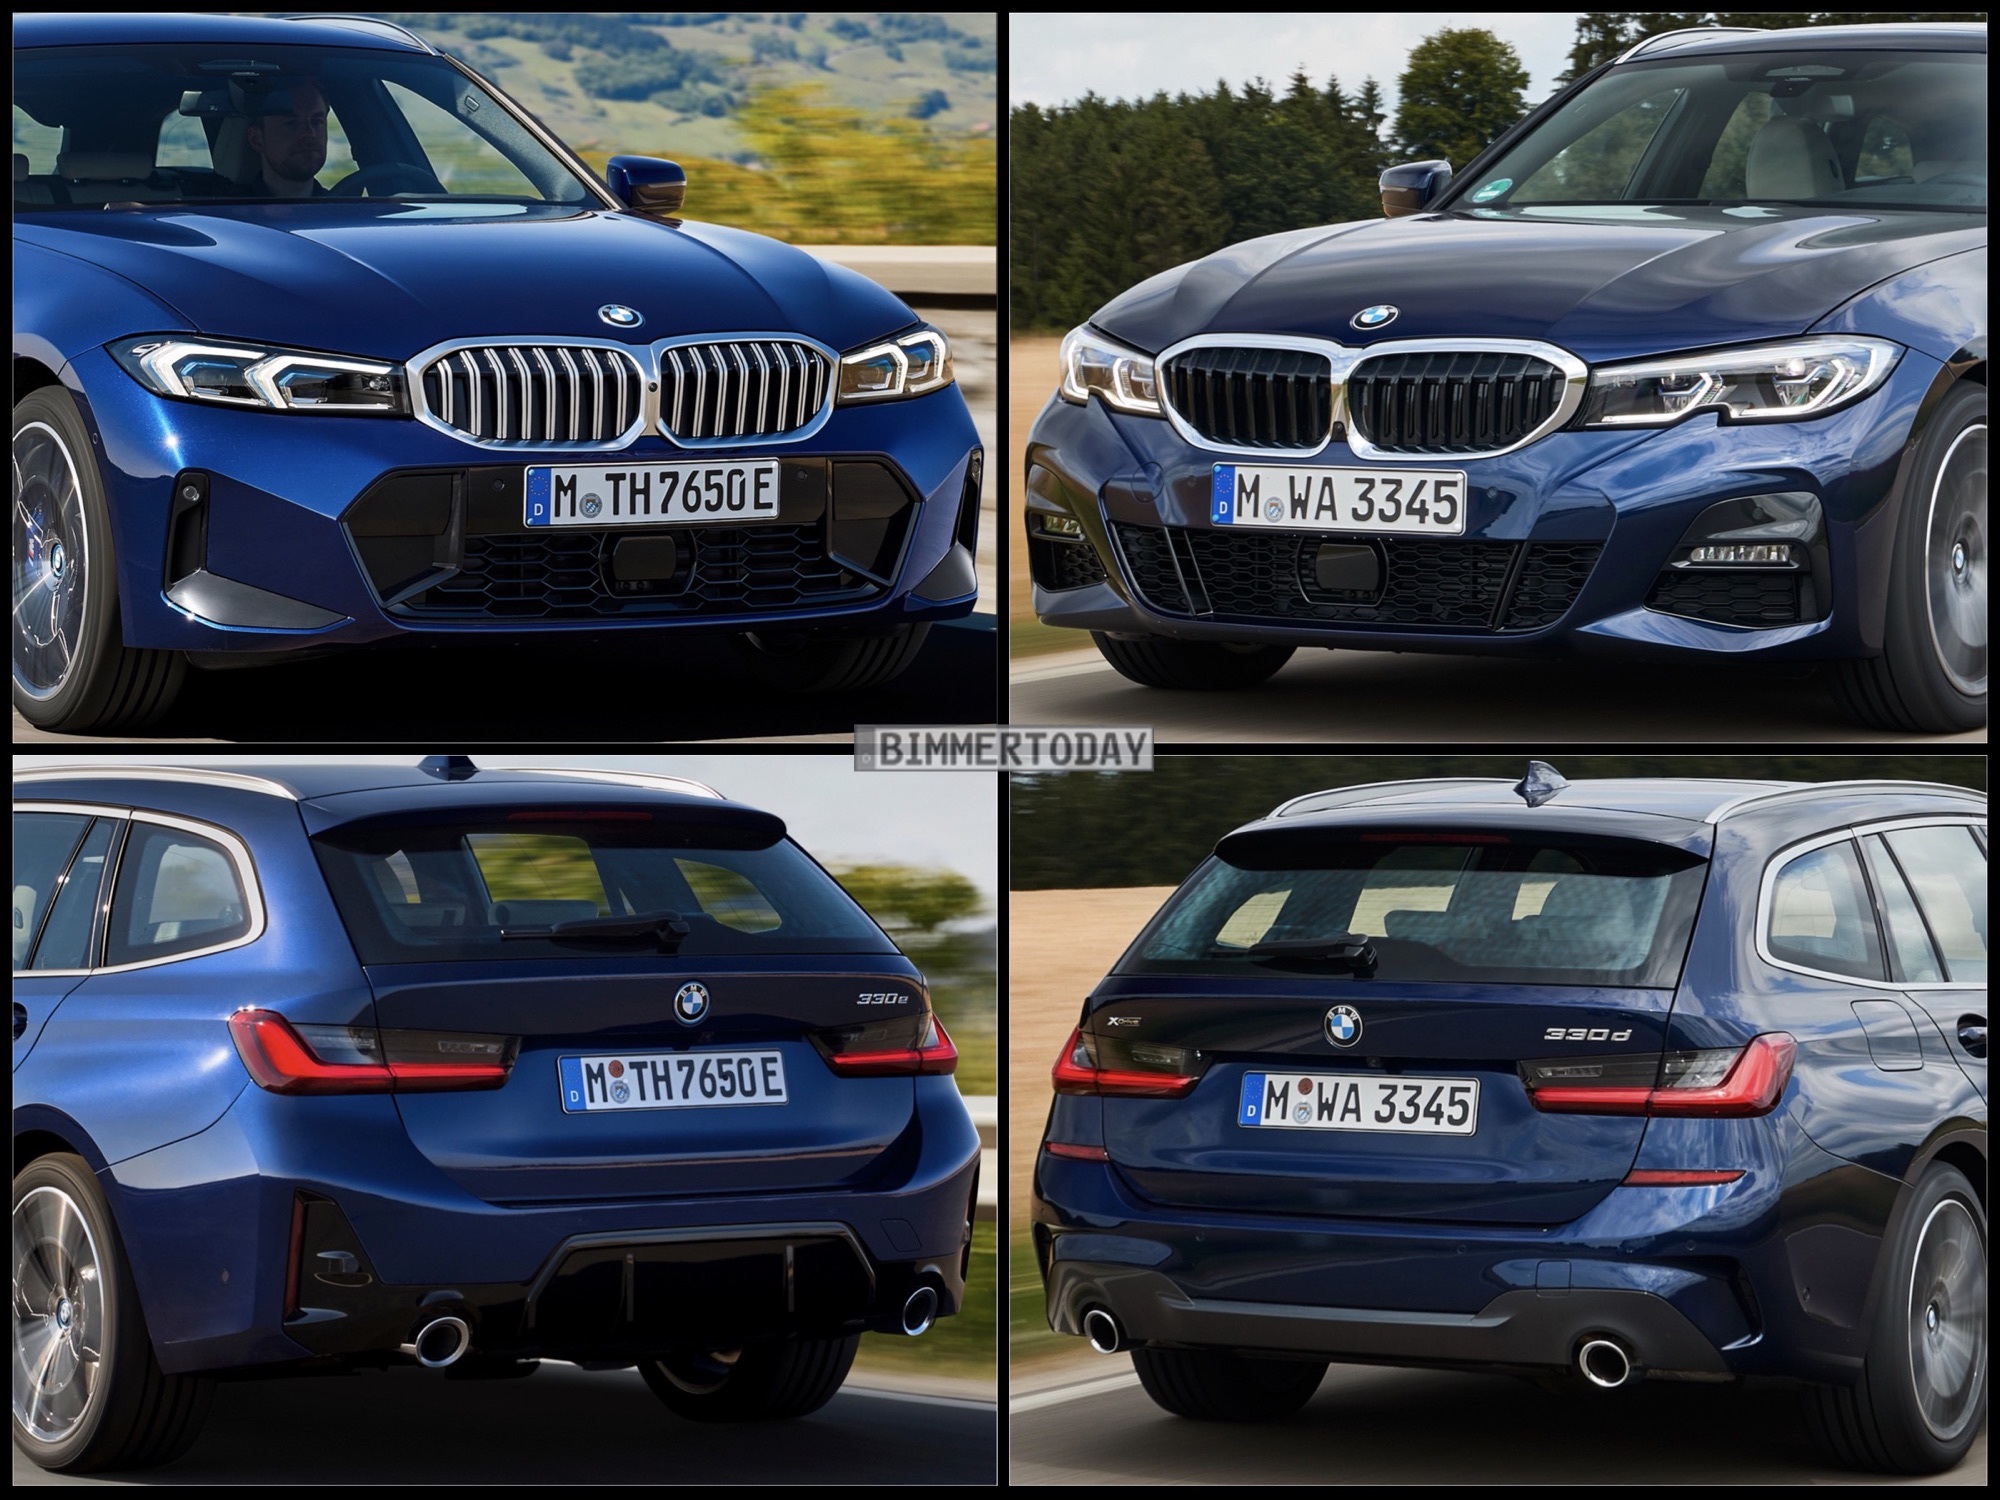 BMW G20/G21 LCI Configurator now available at BMW UK - G20 BMW 3-Series  Forum